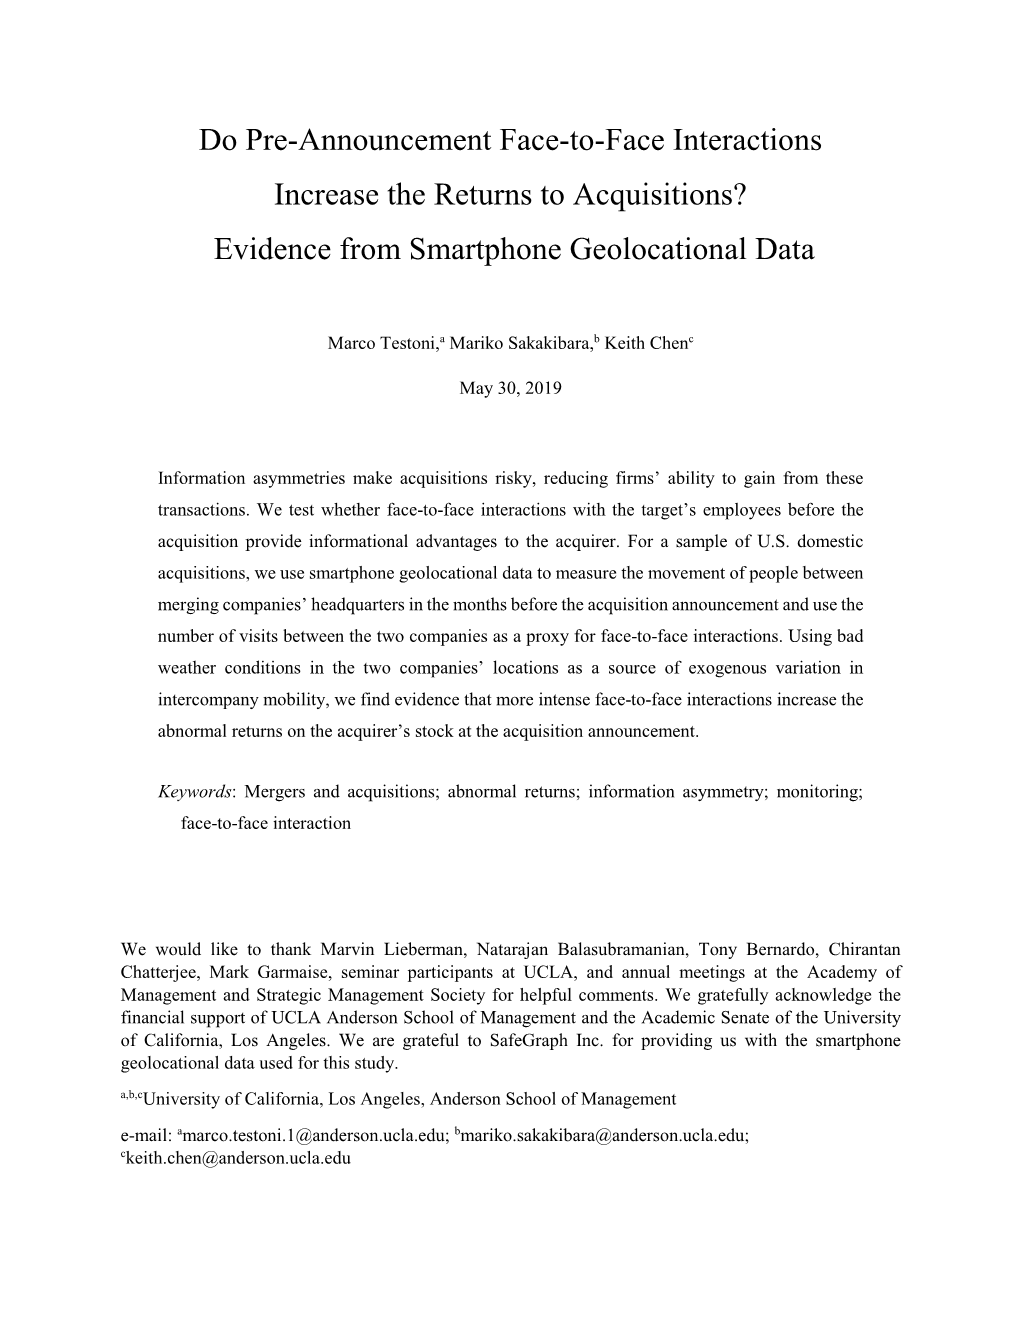 Do Pre-Announcement Face-To-Face Interactions Increase the Returns to Acquisitions? Evidence from Smartphone Geolocational Data